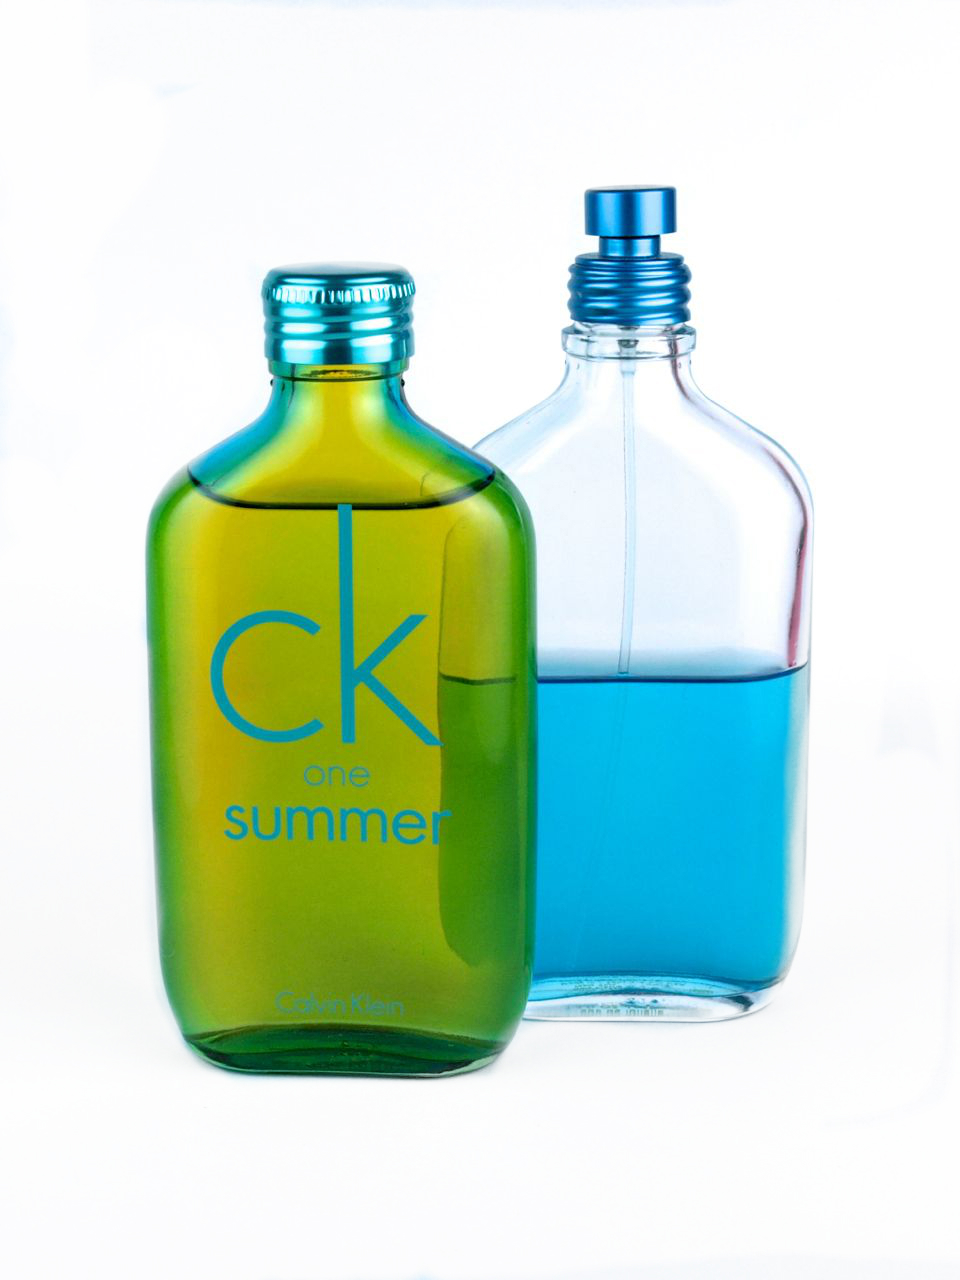 Calvin Klein CK One Summer 2014 Eau de Toilette Spray: Review The Happy Beauty, Makeup, and Skincare Blog with Reviews and Swatches